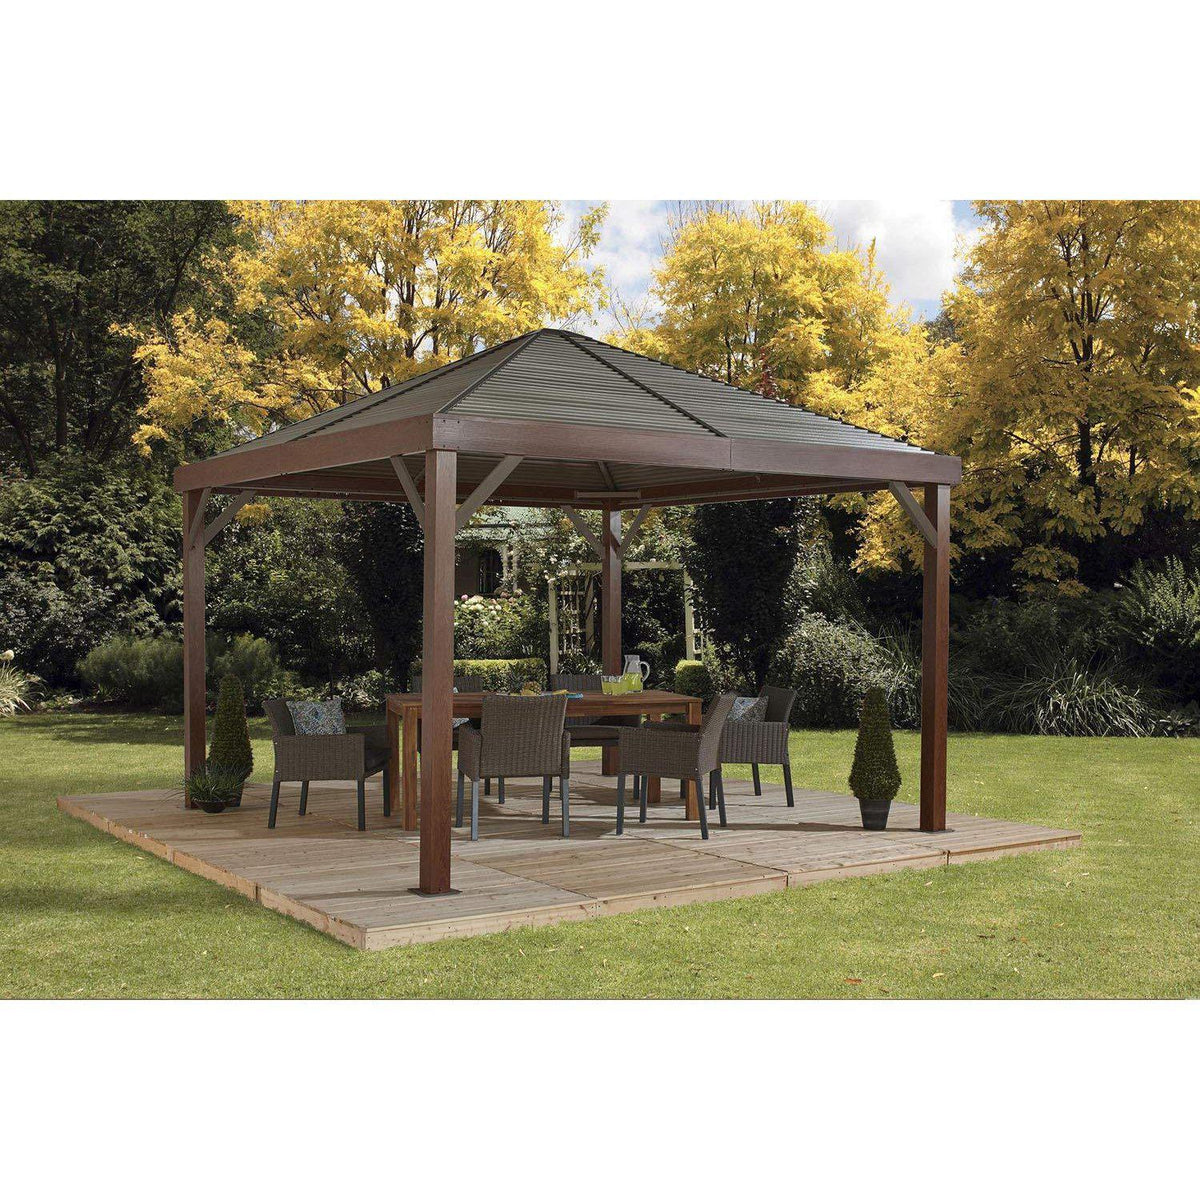 Sojag South Beach Hardtop Gazebo in Wood Finish and Taupe Panels - 12 x 12 Ft